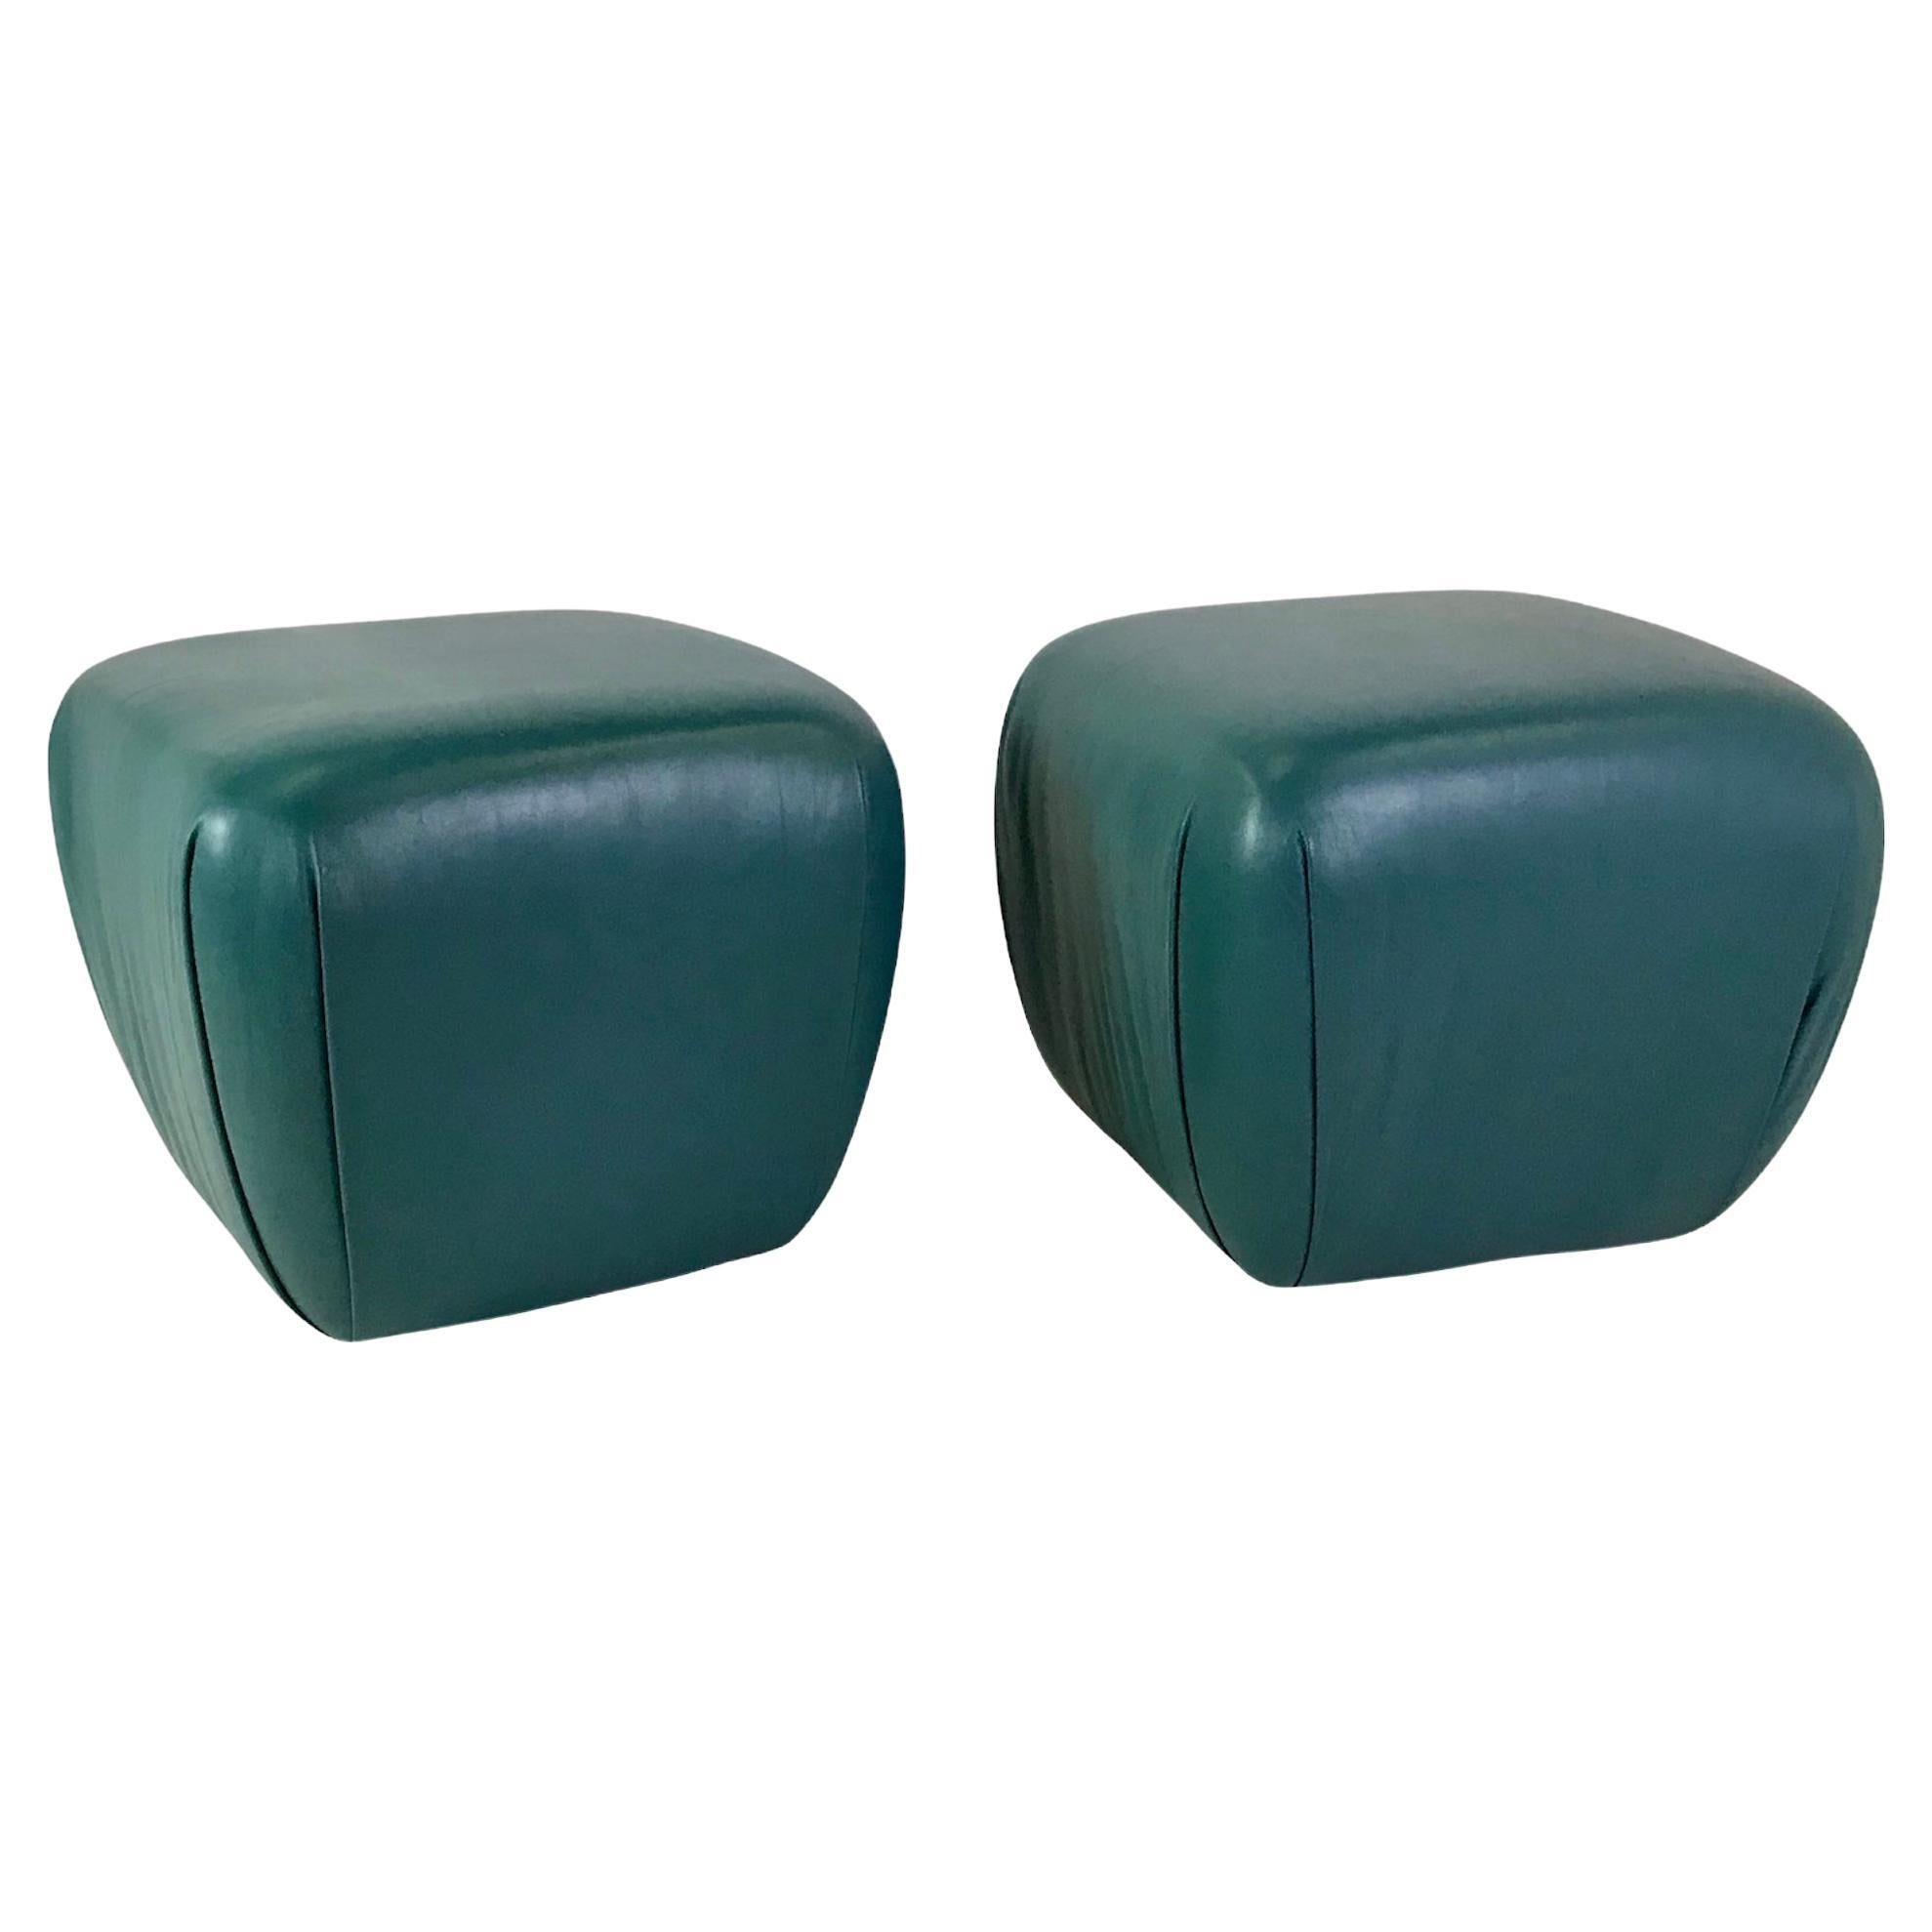 Modern Pair of Teal Leather Ottomans Stools in the Style of Karl Springer, 1980s